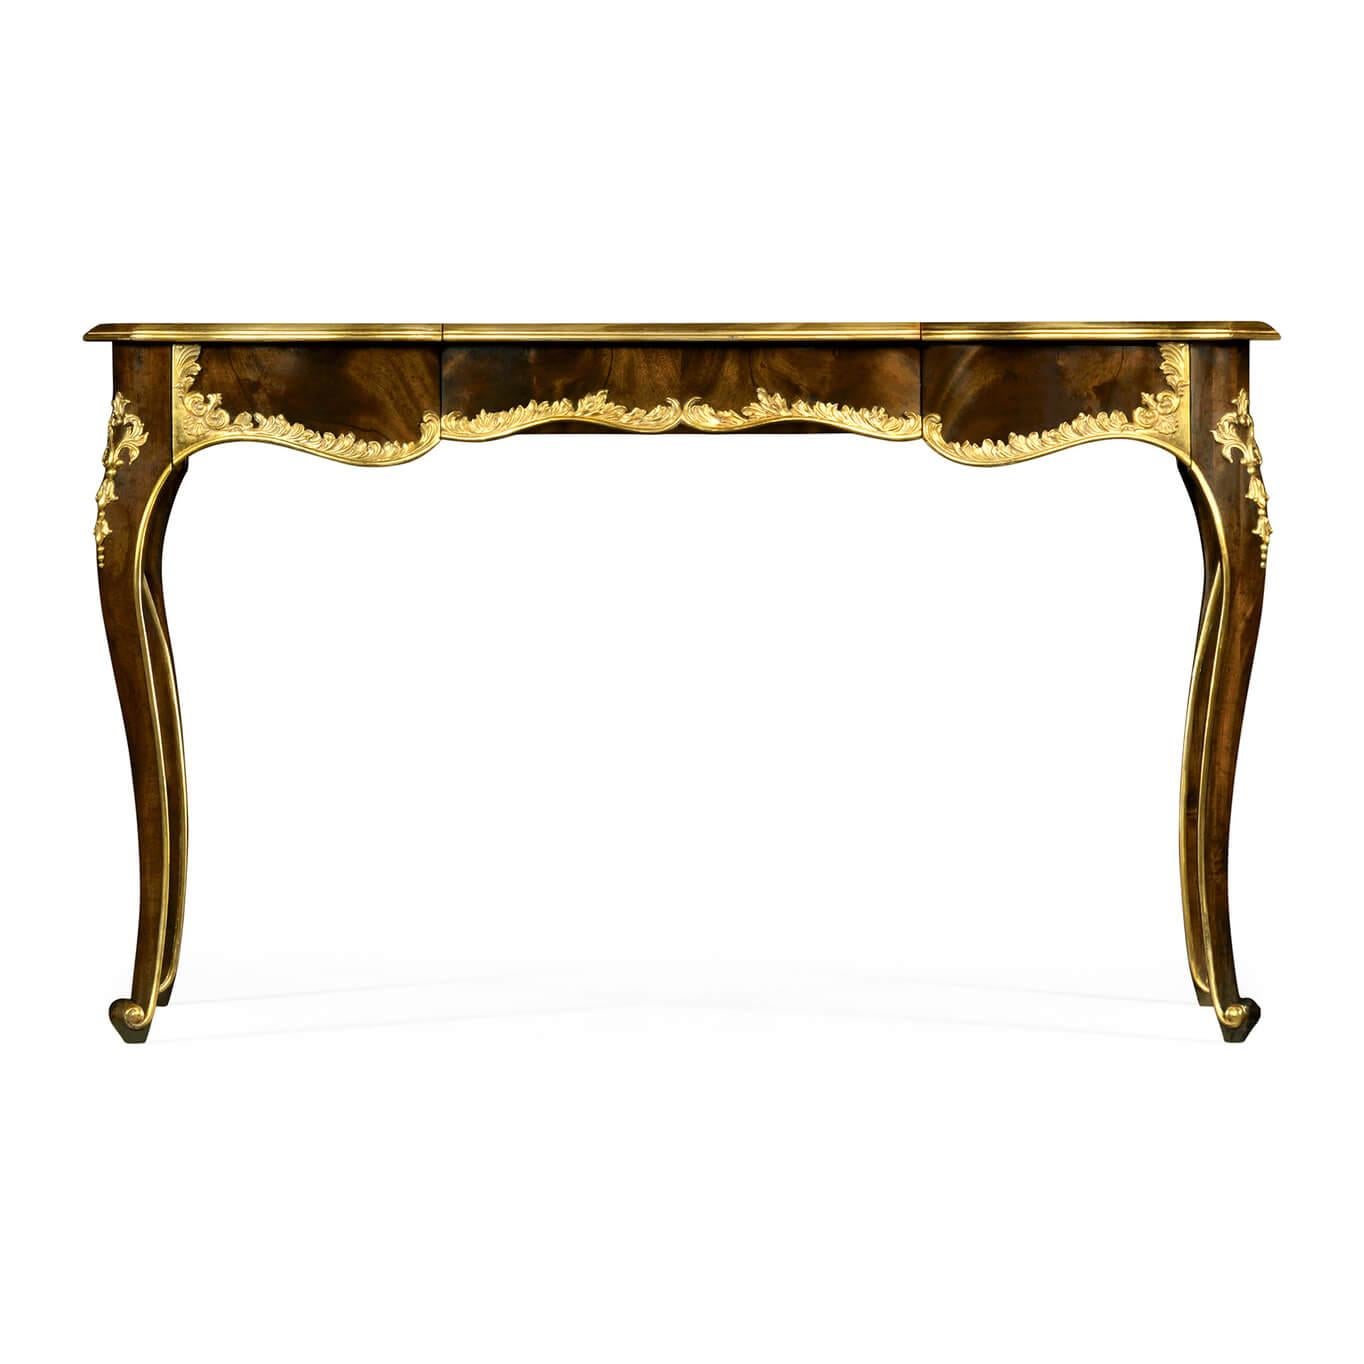 Chippendale Mahogany and Gilt Rococo Dressing Table